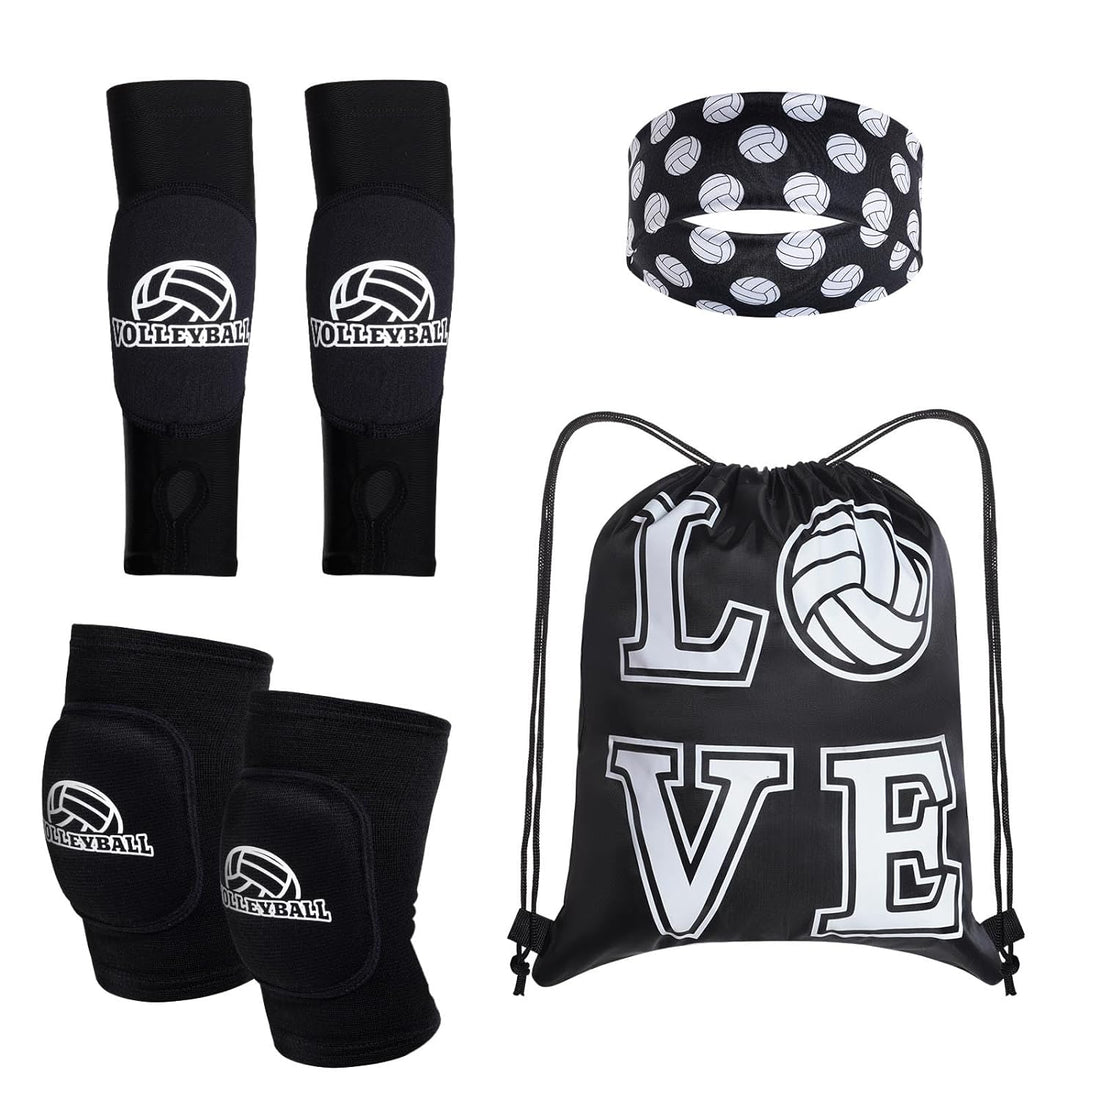 Topbuti 4 Pcs Volleyball Accessories Youth Volleyball Knee Pads Volleyball Arm Sleeves Protection Volleyball Headband Drawstring Bag for Women Teens Girls Boys Training (Style 1)